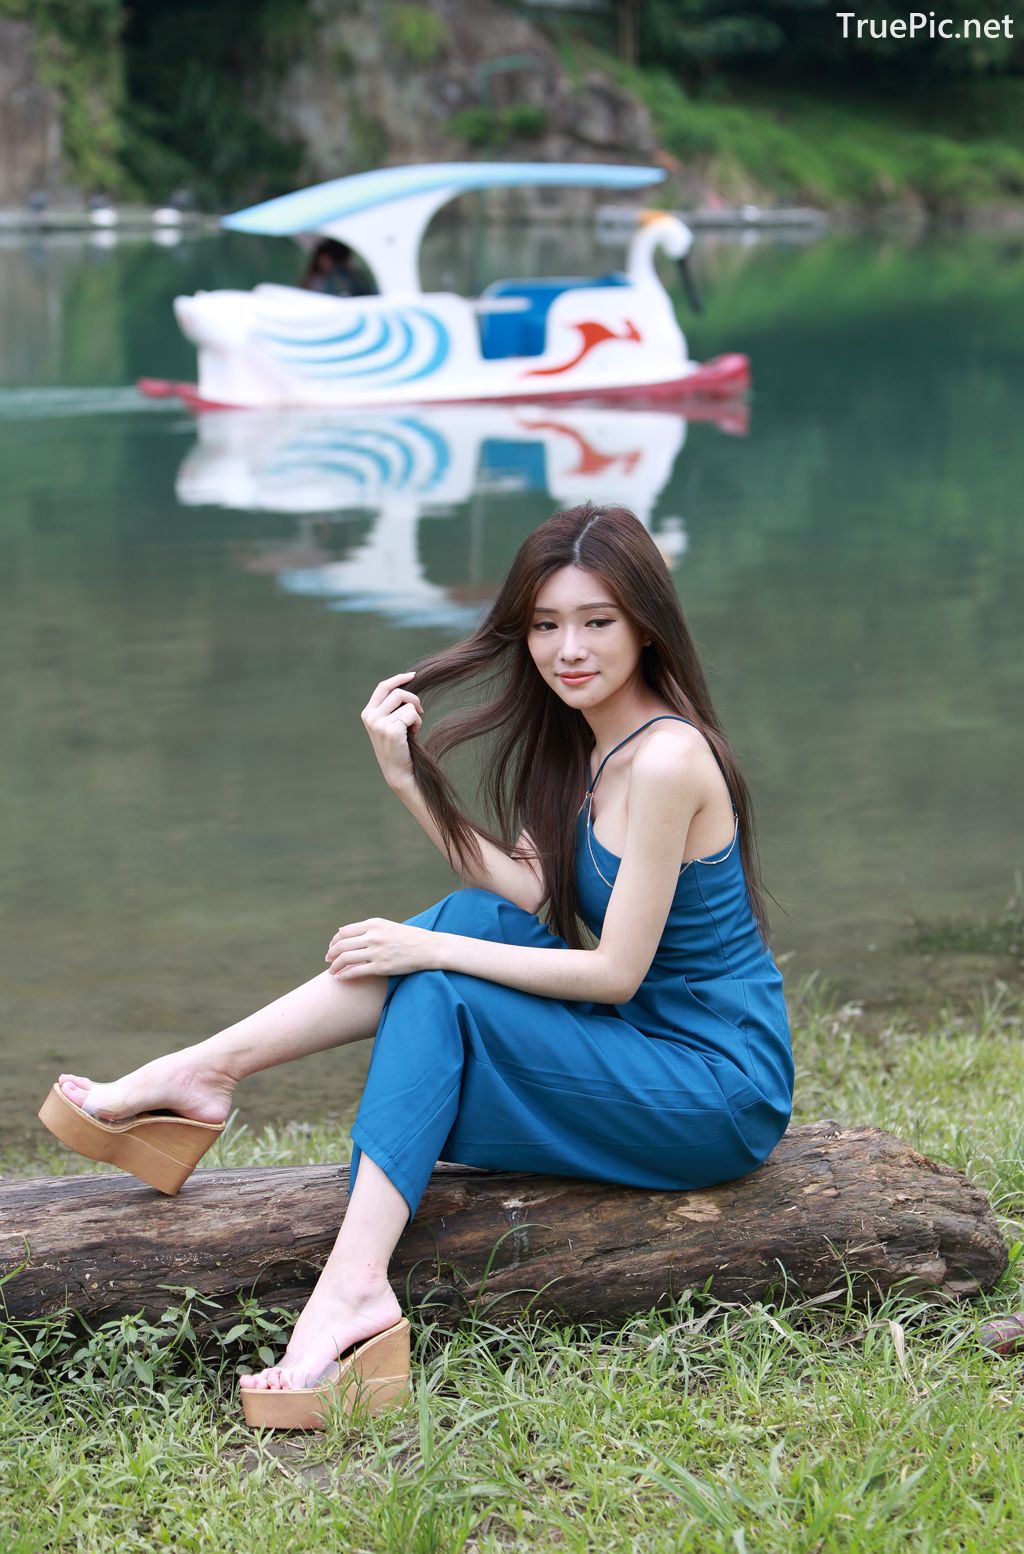 Image-Taiwanese-Pure-Girl-承容-Young-Beautiful-And-Lovely-TruePic.net- Picture-94